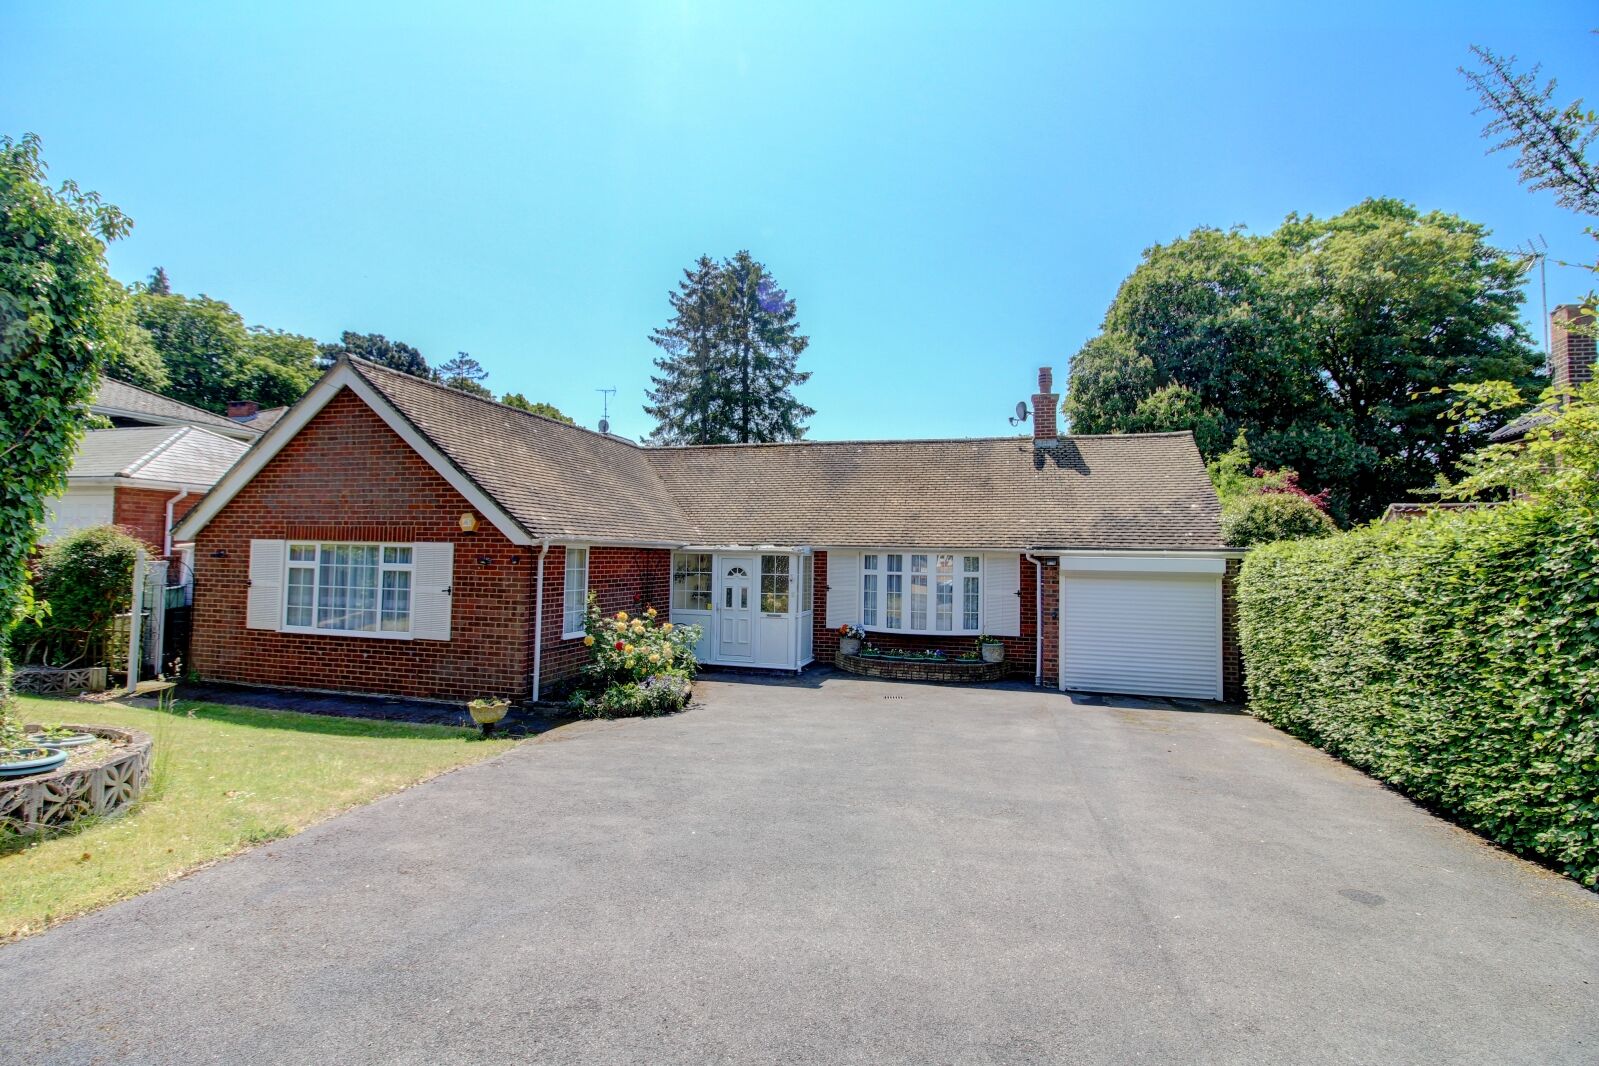 3 bedroom detached bungalow for sale Amersham Hill Gardens, High Wycombe, HP13, main image